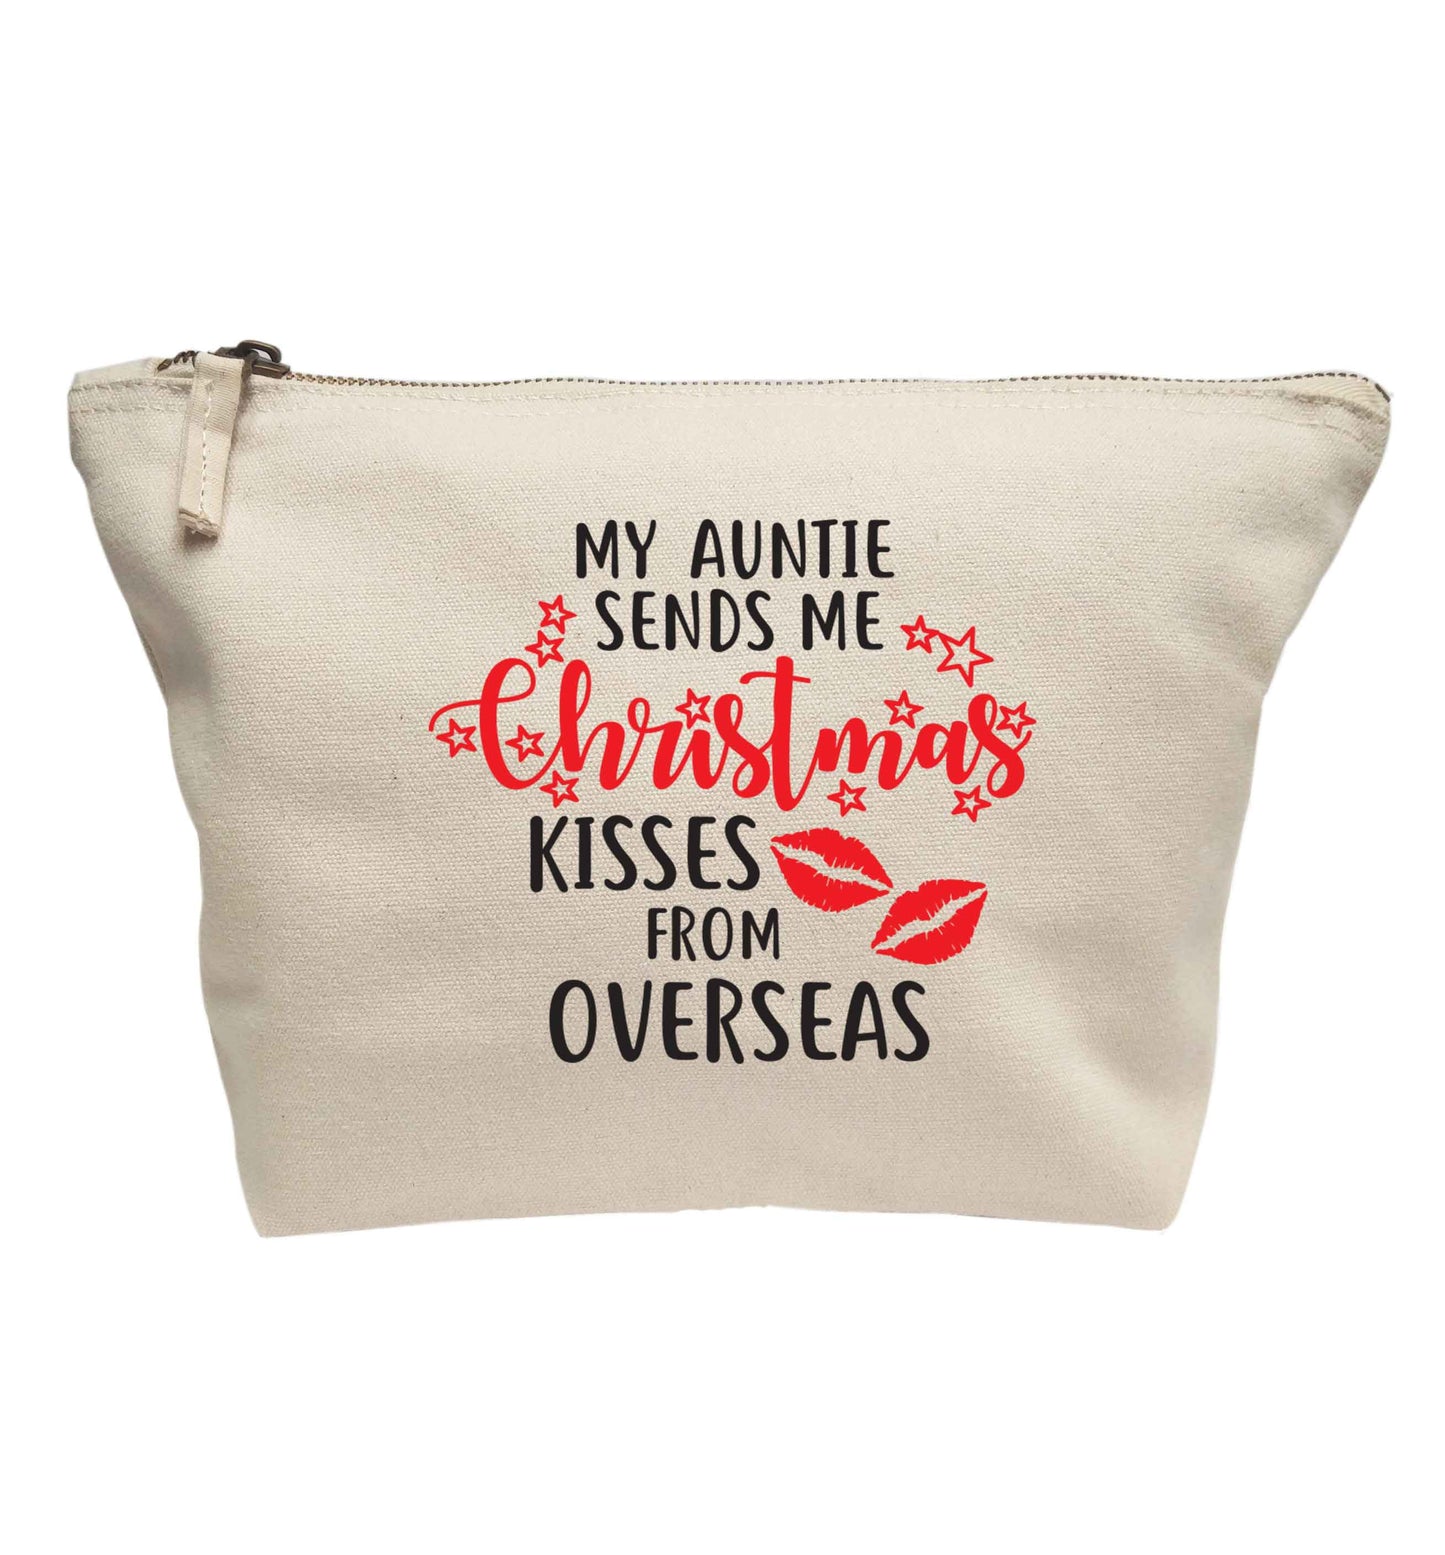 My auntie sends me Christmas kisses from overseas | Makeup / wash bag